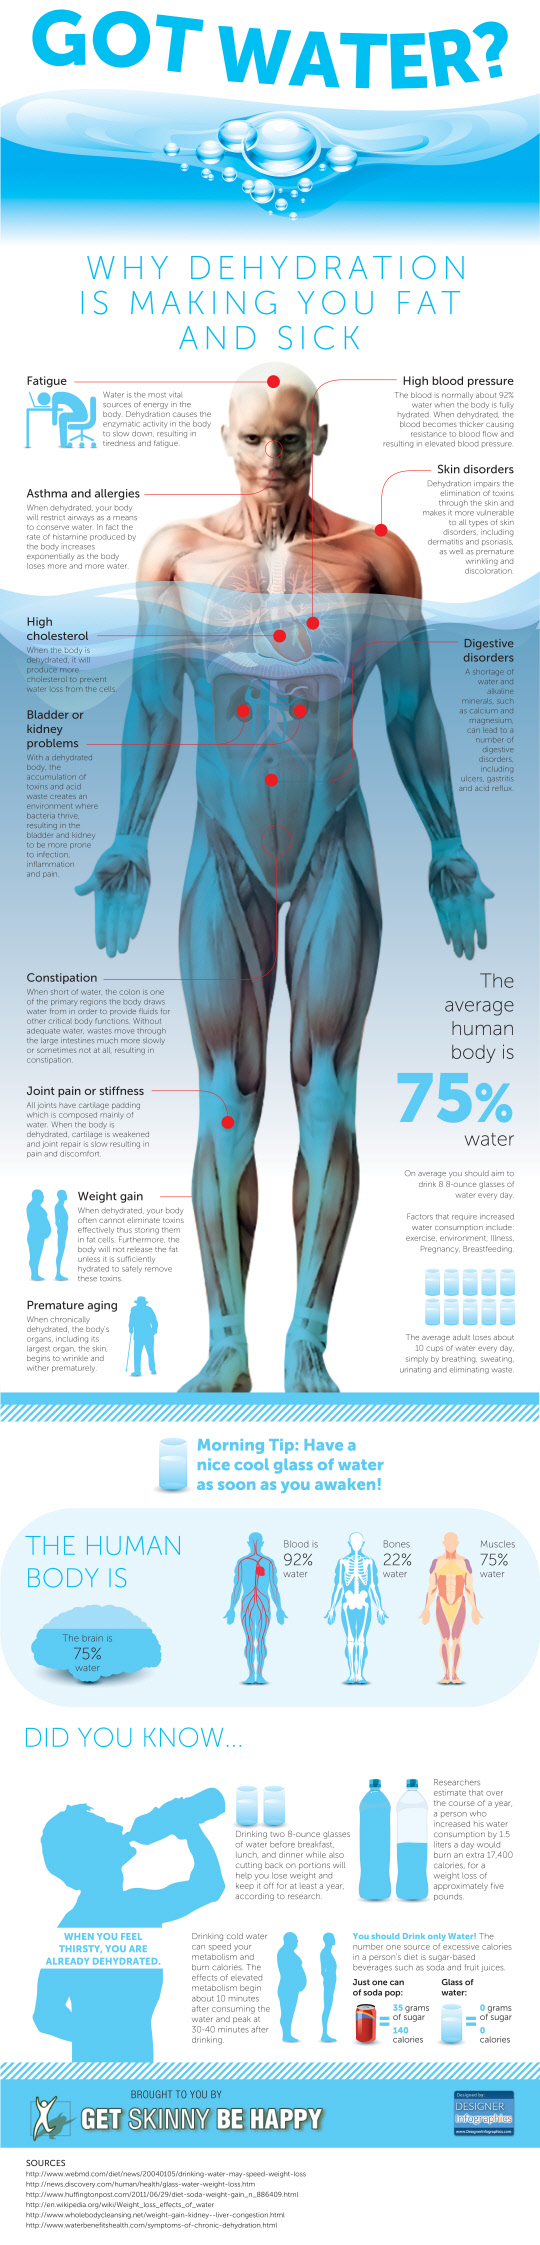 Got Water? Why Dehydration is Making you Fat and Sick – Infographic